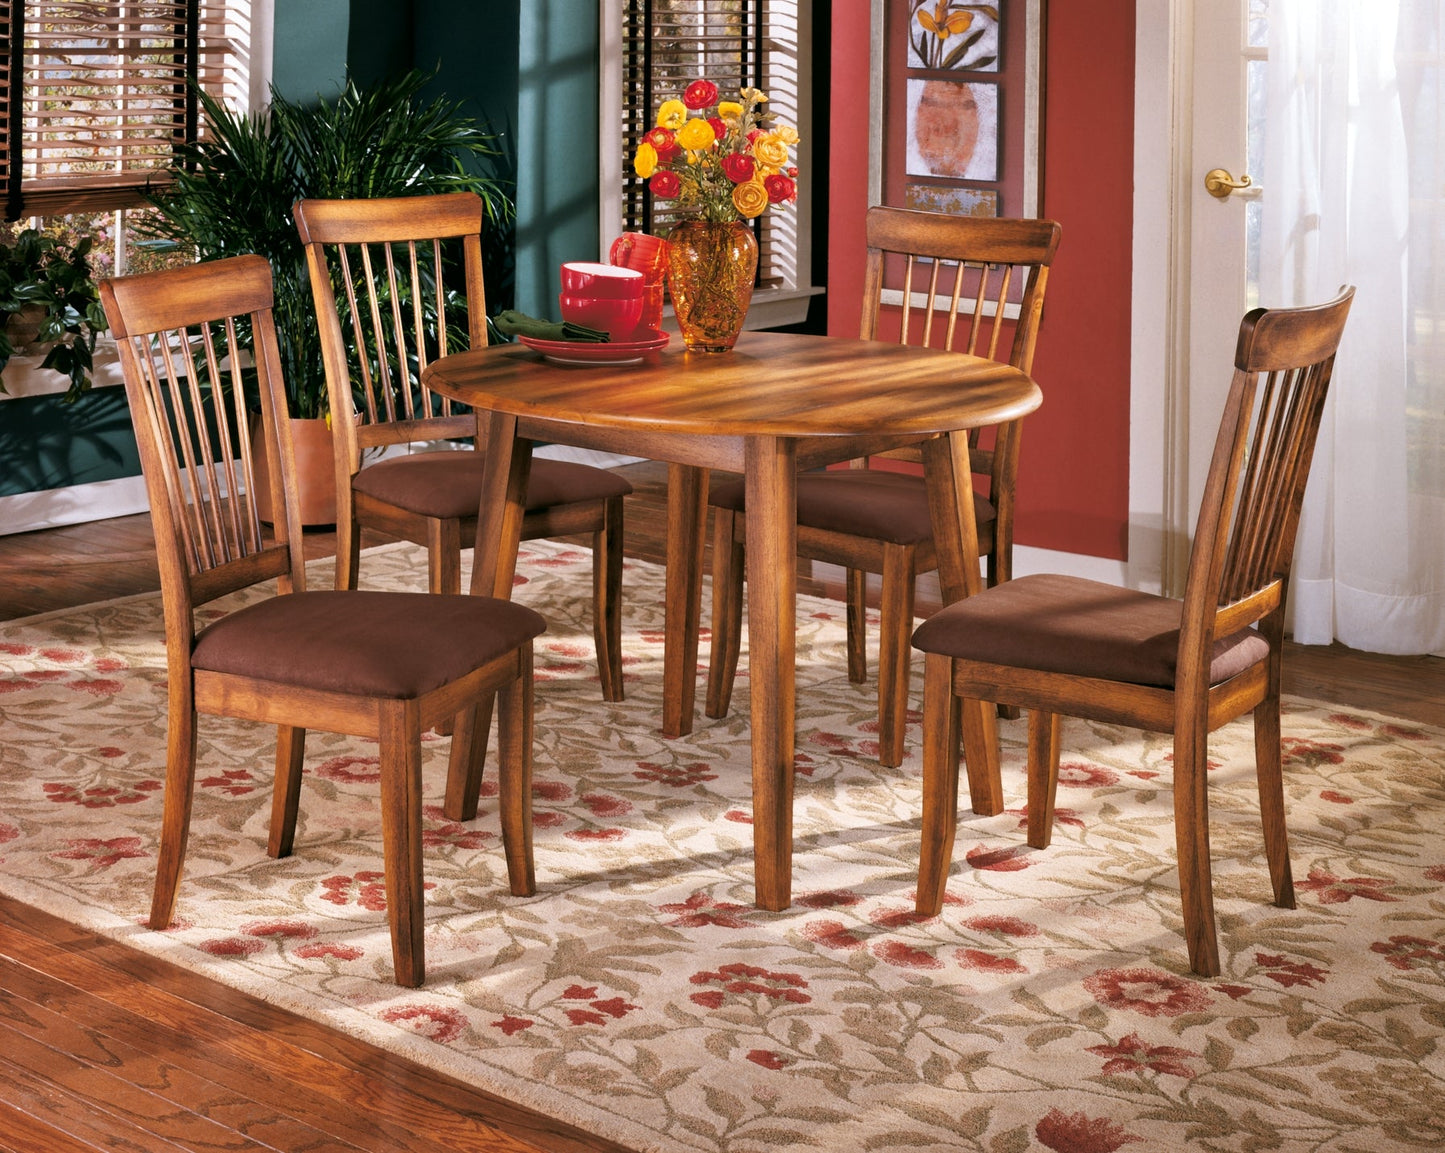 Berringer Dining Table and 4 Chairs at Walker Mattress and Furniture Locations in Cedar Park and Belton TX.